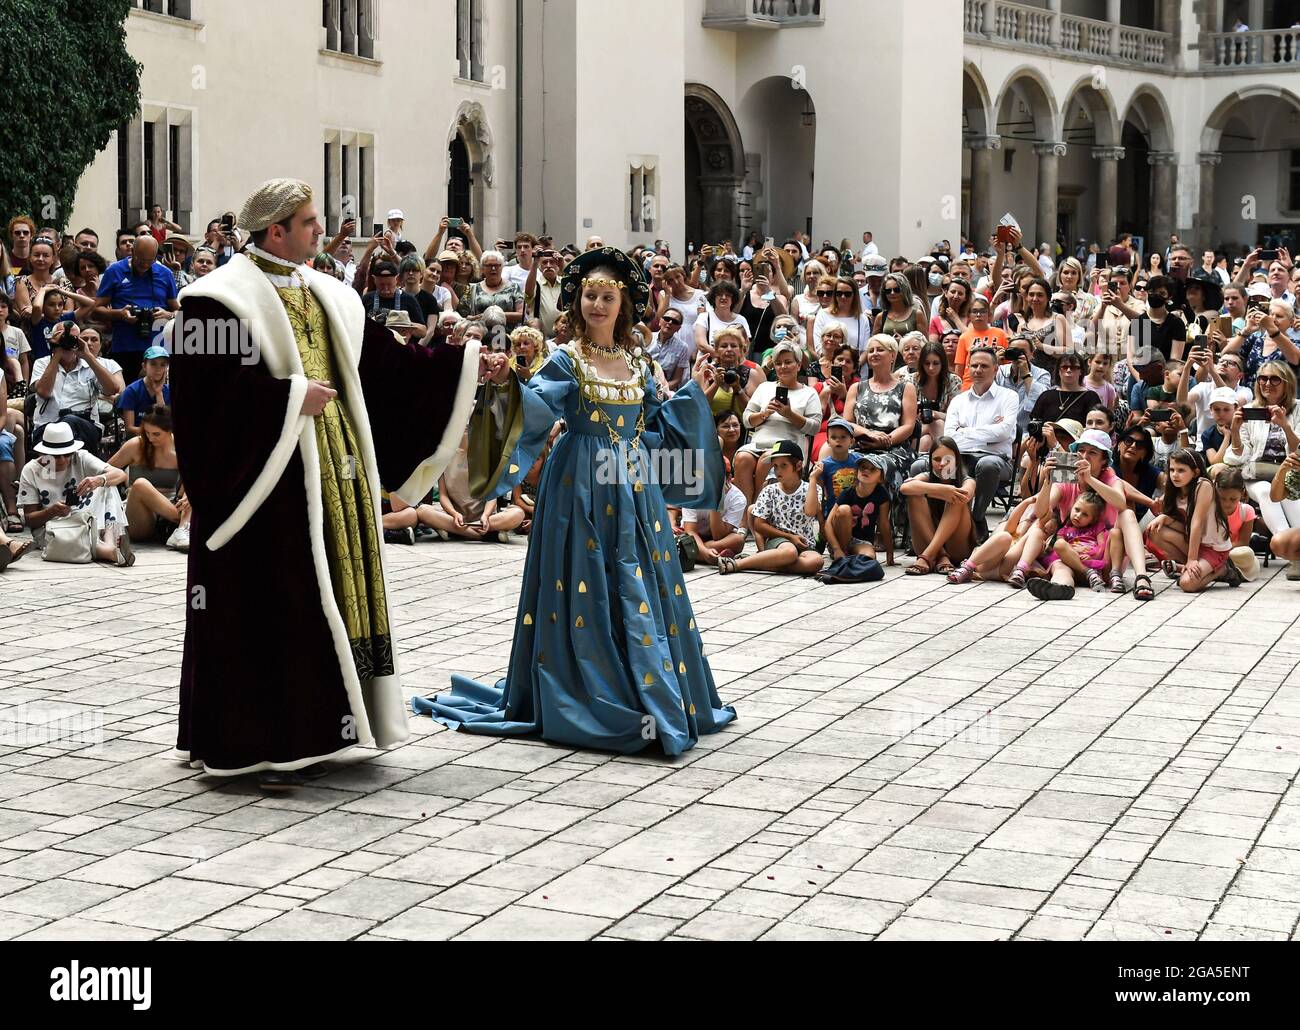 Performers dancing on stage during the fashion show.Dancers from the Terpsichore Dance Theatre and actors from Nomina Rosae Teatr presented a reconstruction of Renaissance fashion in the courtyard of the Wawel Royal Castle in Krakow. Stock Photo